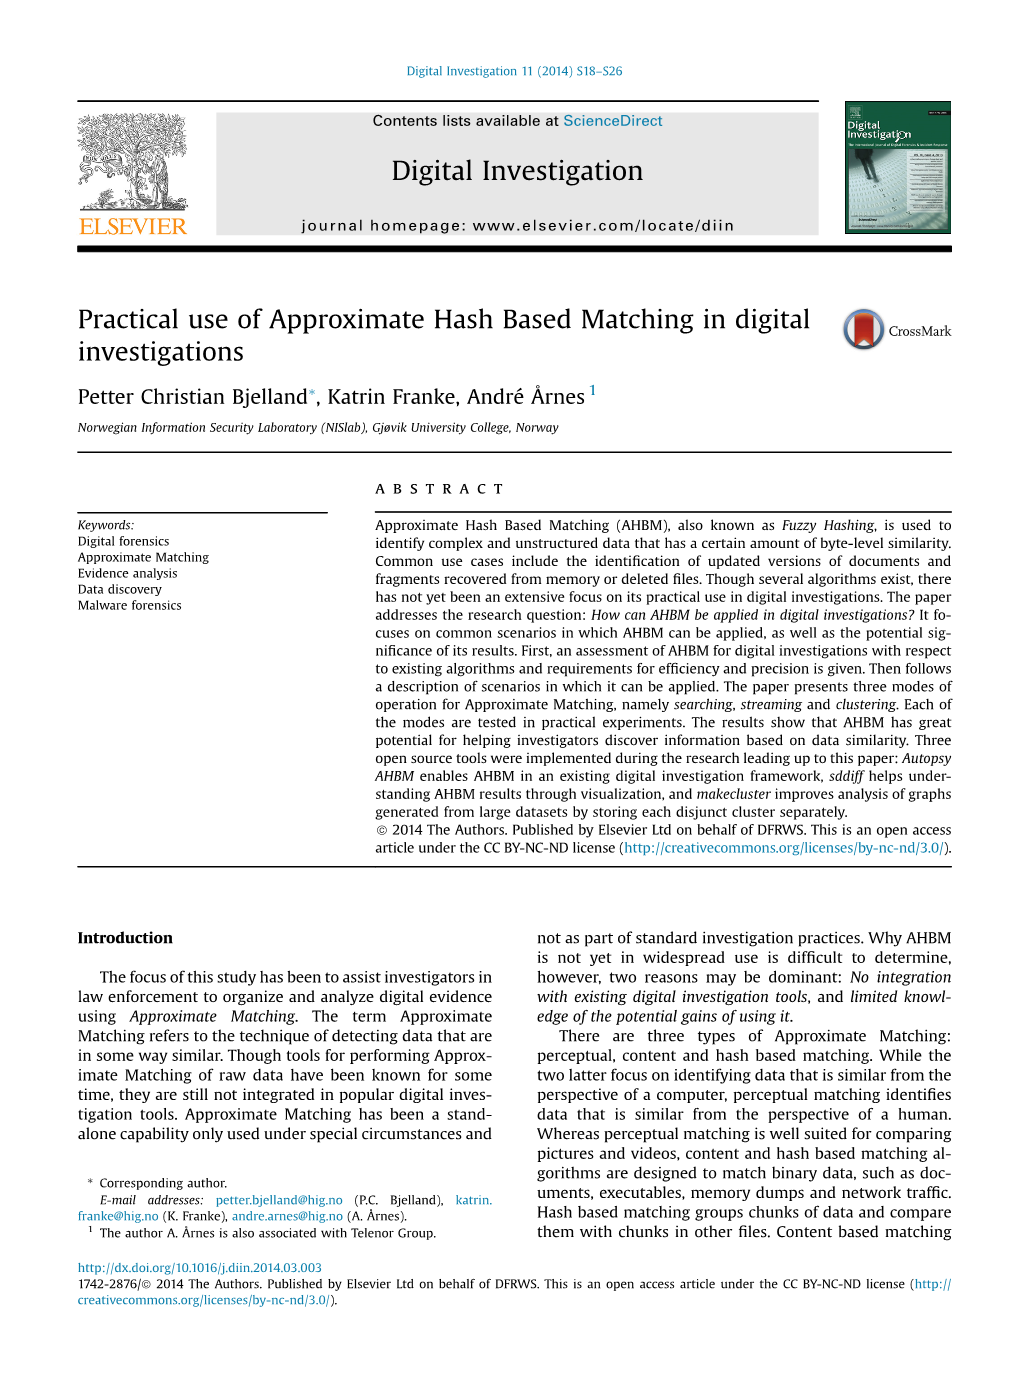 Practical Use of Approximate Hash Based Matching in Digital Investigations